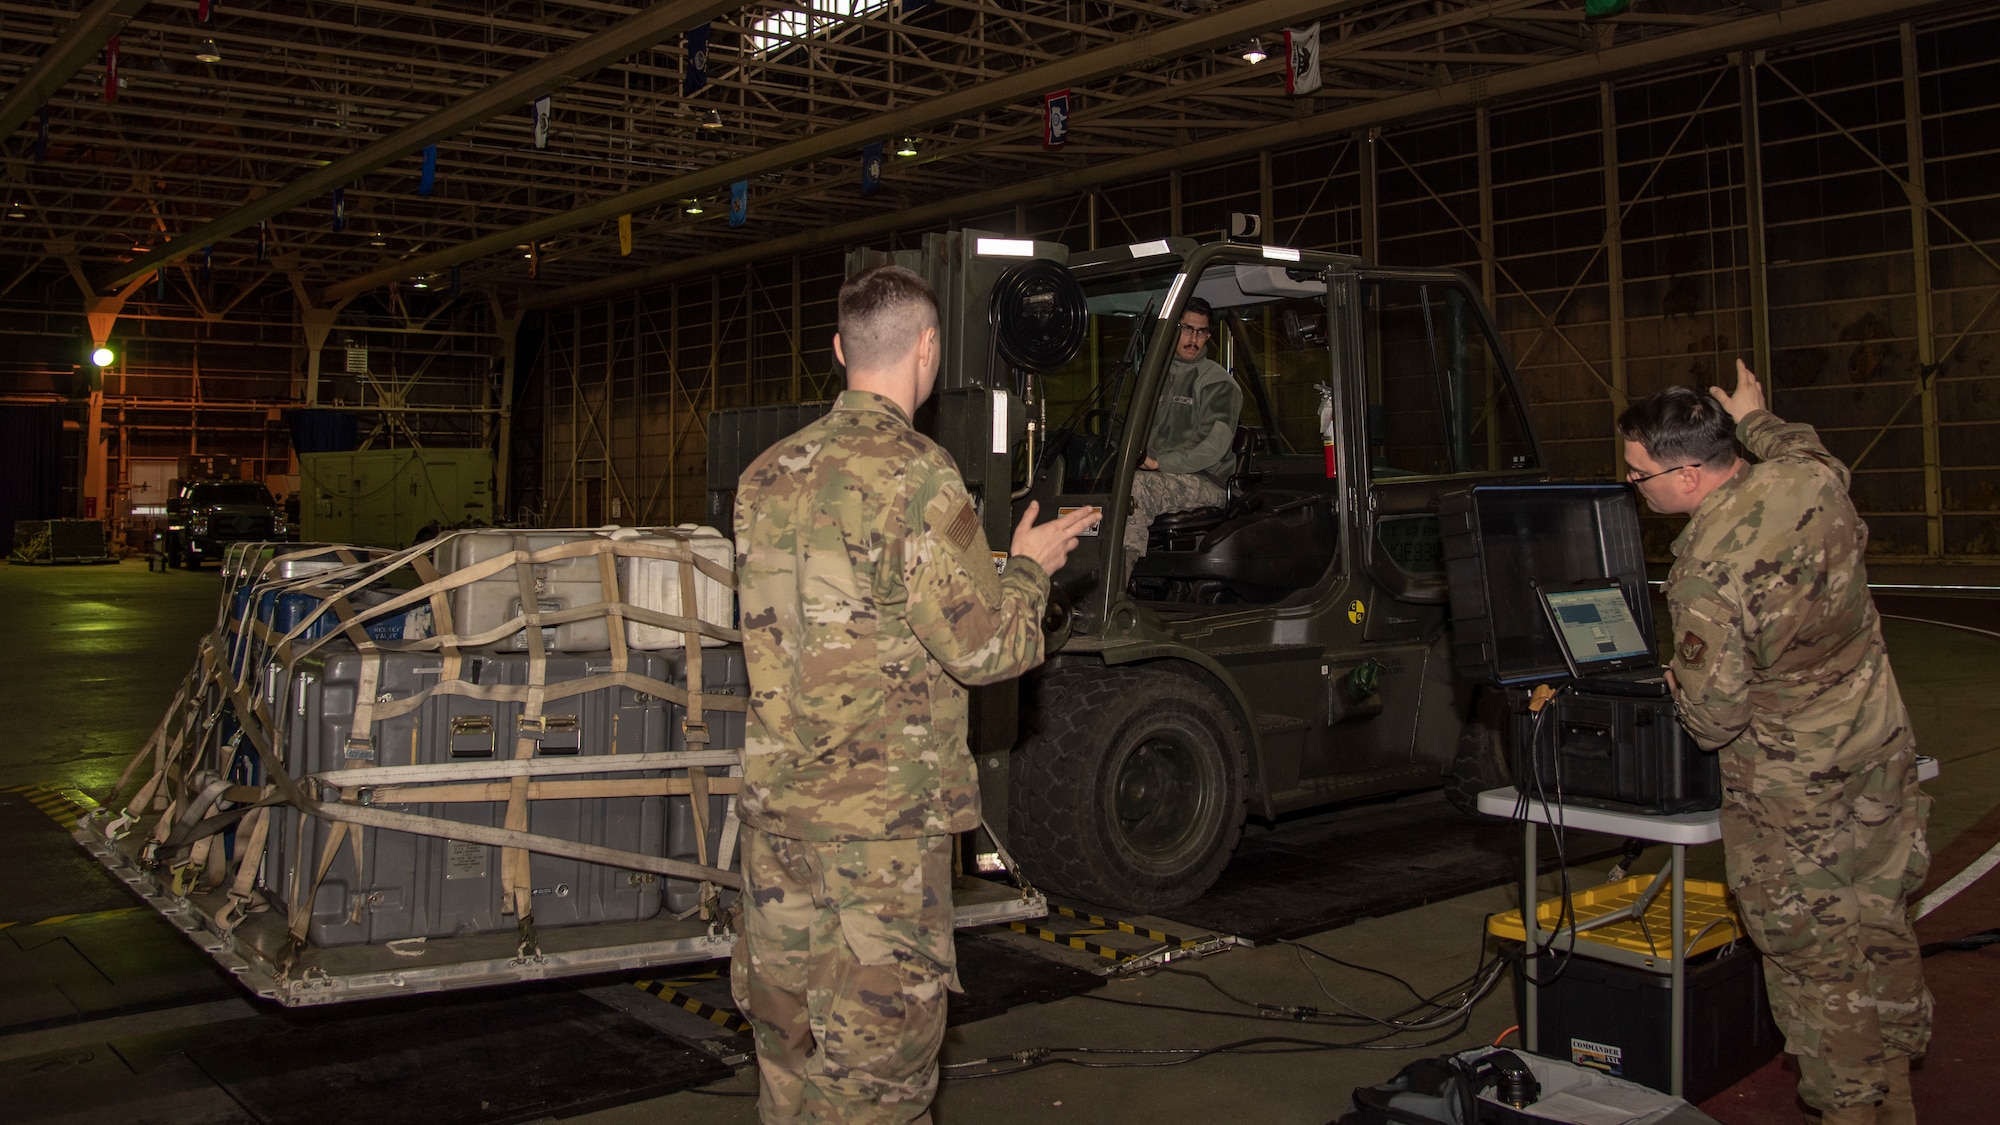 U.S. Air Force Staff Sgt. Daniel Cruz, a 35th Logistics Readiness Squadron outbound cargo supervisor, drives a forklift over the Weigh-In-Motion scales at Misawa Air Base, Japan, March 13, 2020. The WIM scale saves countless man-hours by collecting necessary data all at once through an advanced system of sensors, dynamic measurement system and data archiving. (U.S. Air Force photo by Airman 1st Class China M. Shock)